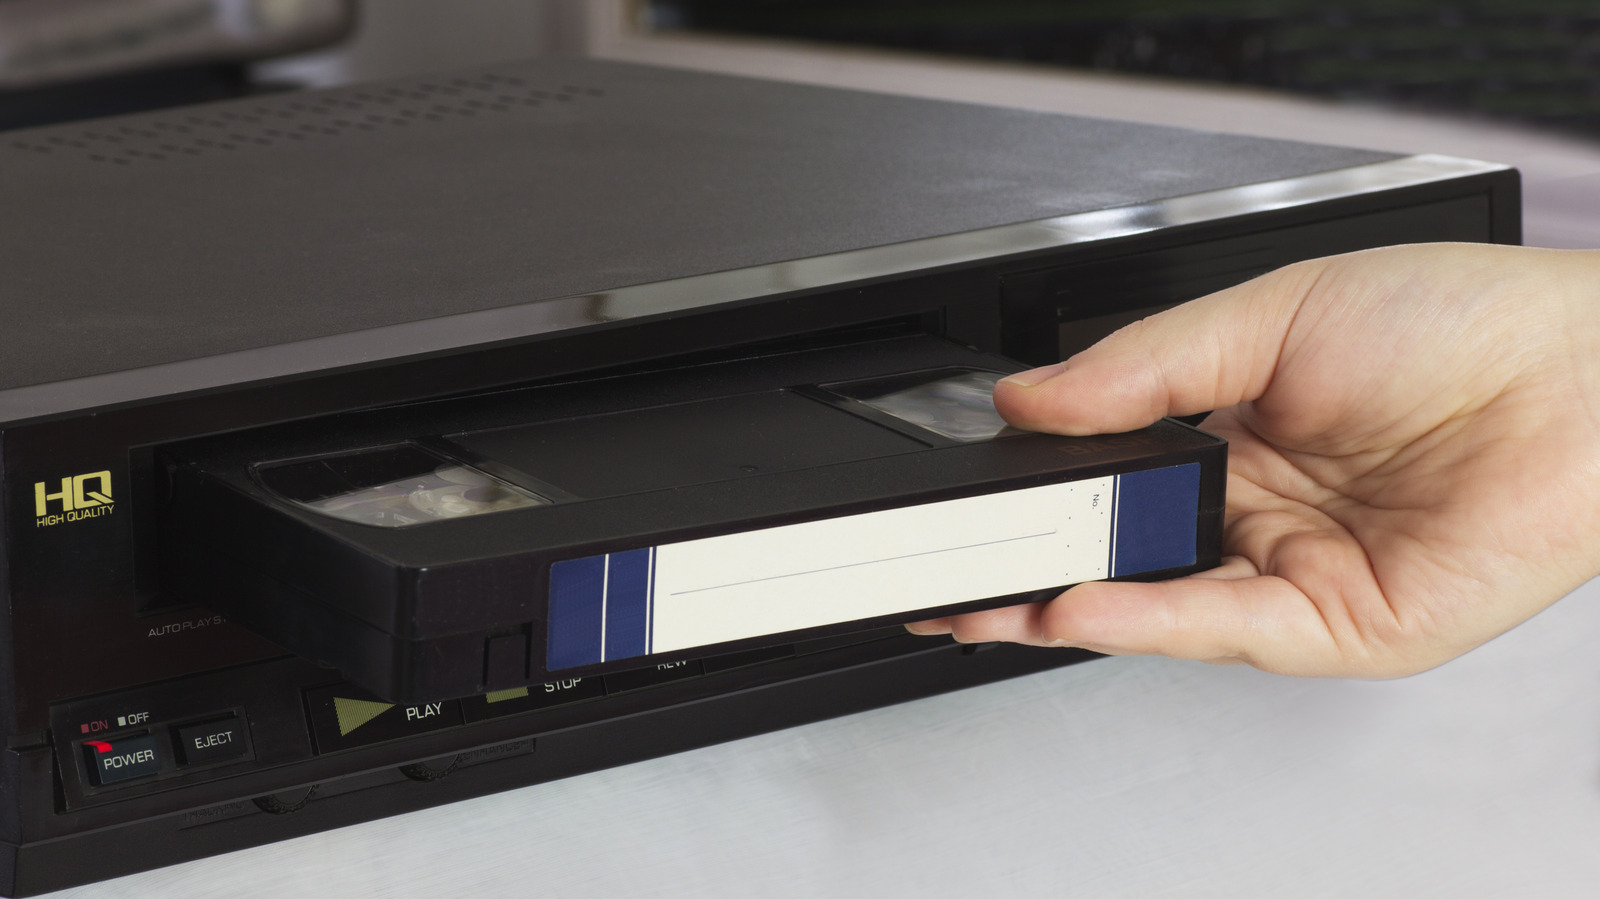 Betamax vs. VHS Tapes: What is the Difference?